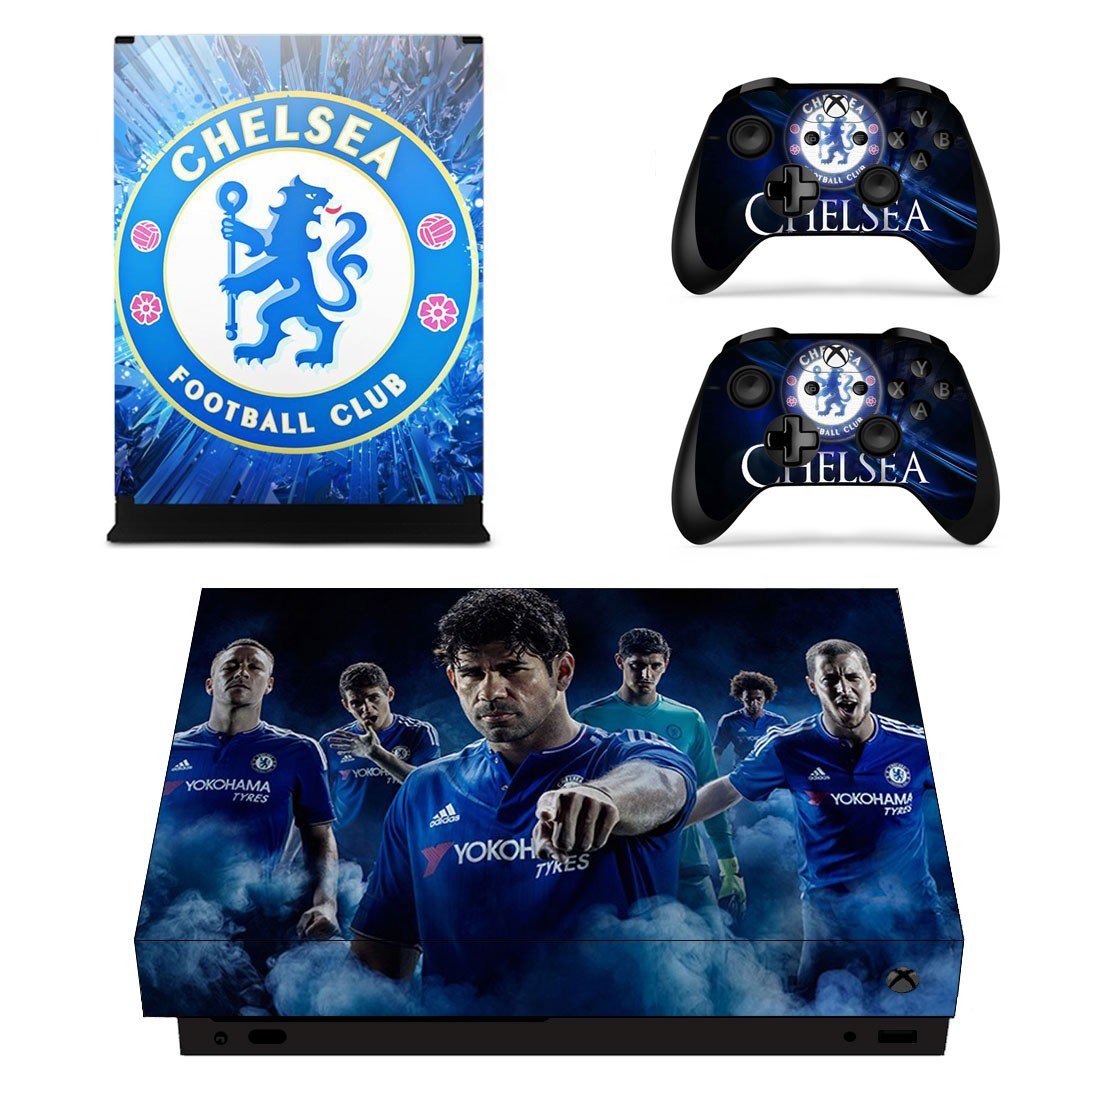 Chelsea FC Skin Sticker for Xbox One X Controllers